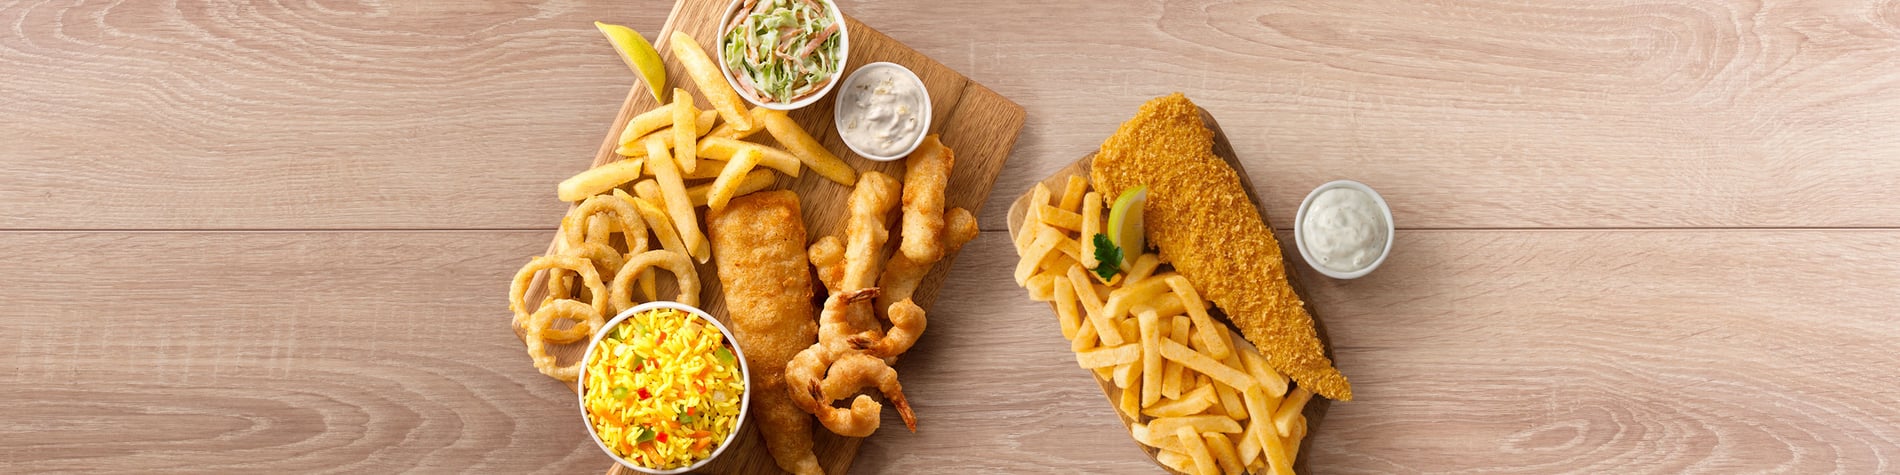 Seafood meals from Fishaways White River including a Crunchy Fish and Chips meal and a seafood Platter for One with hake, calamari, prawns, chips, onion rings, and coleslaw.